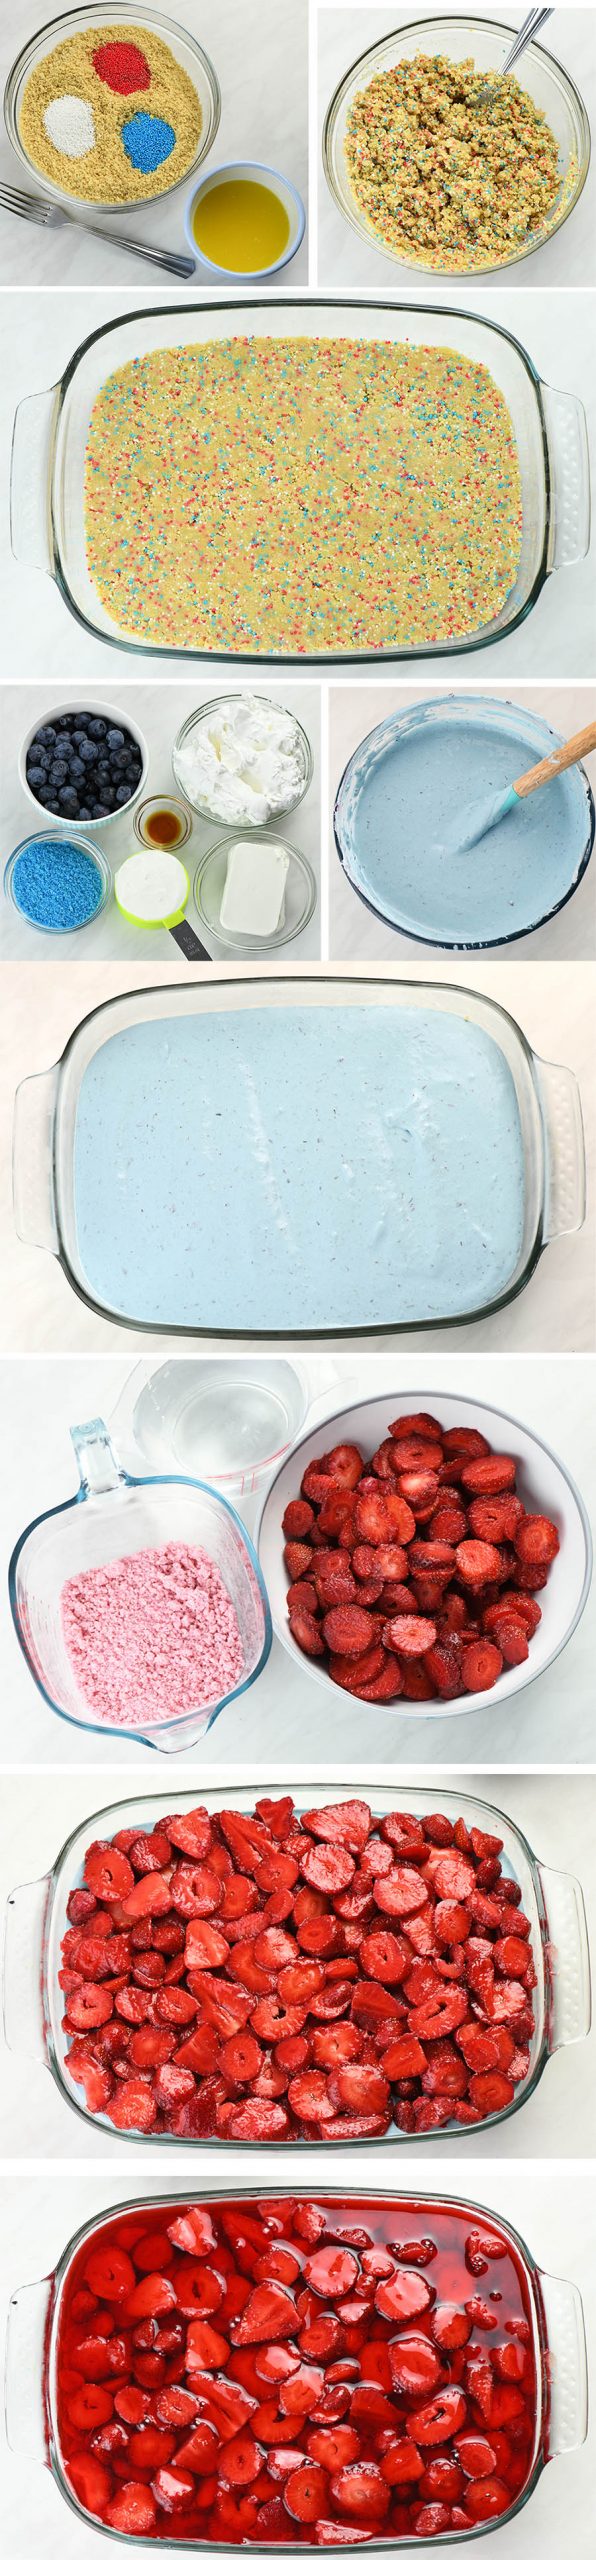 Summer Berry Jello Lasagna step by step instructions.